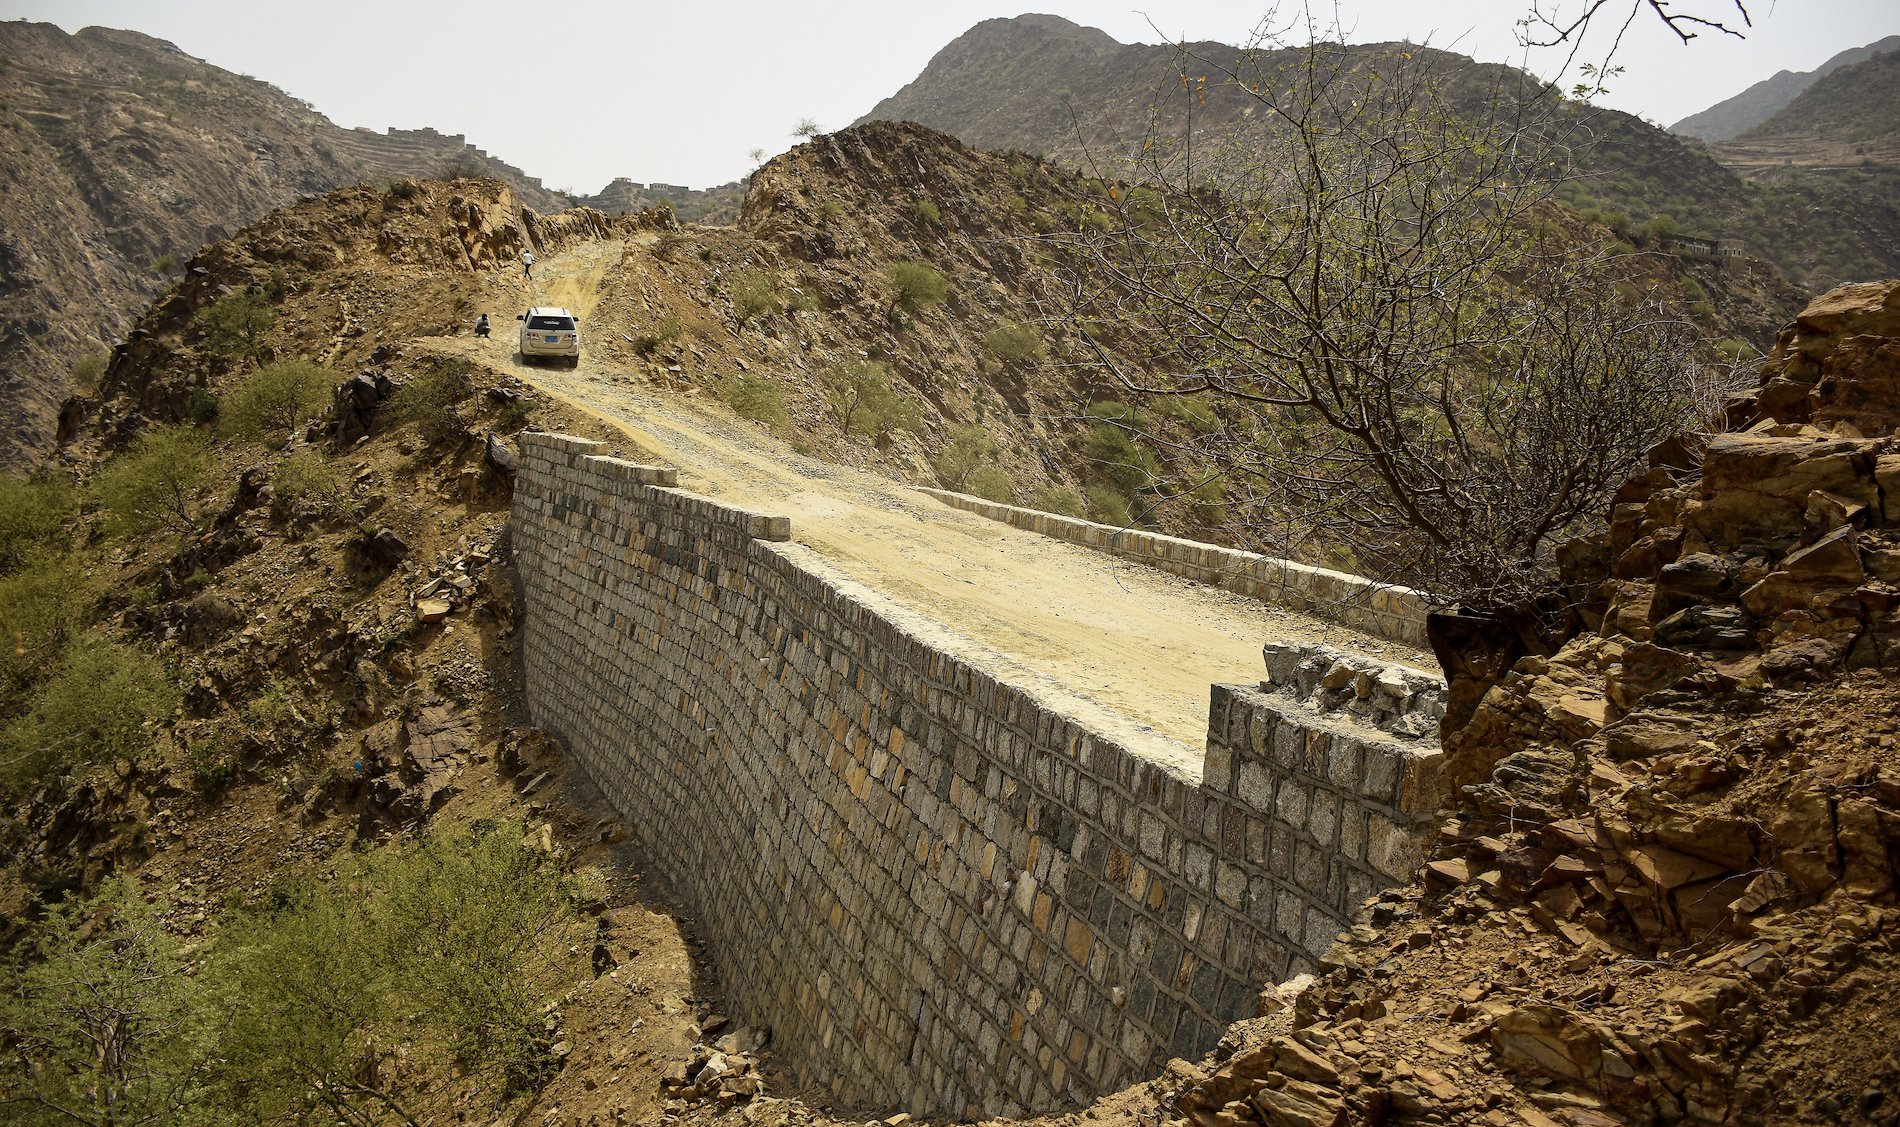 The road was paved, and gabions were built to protect car and truck drivers. Photo Credit: UNDP Yemen / 2022